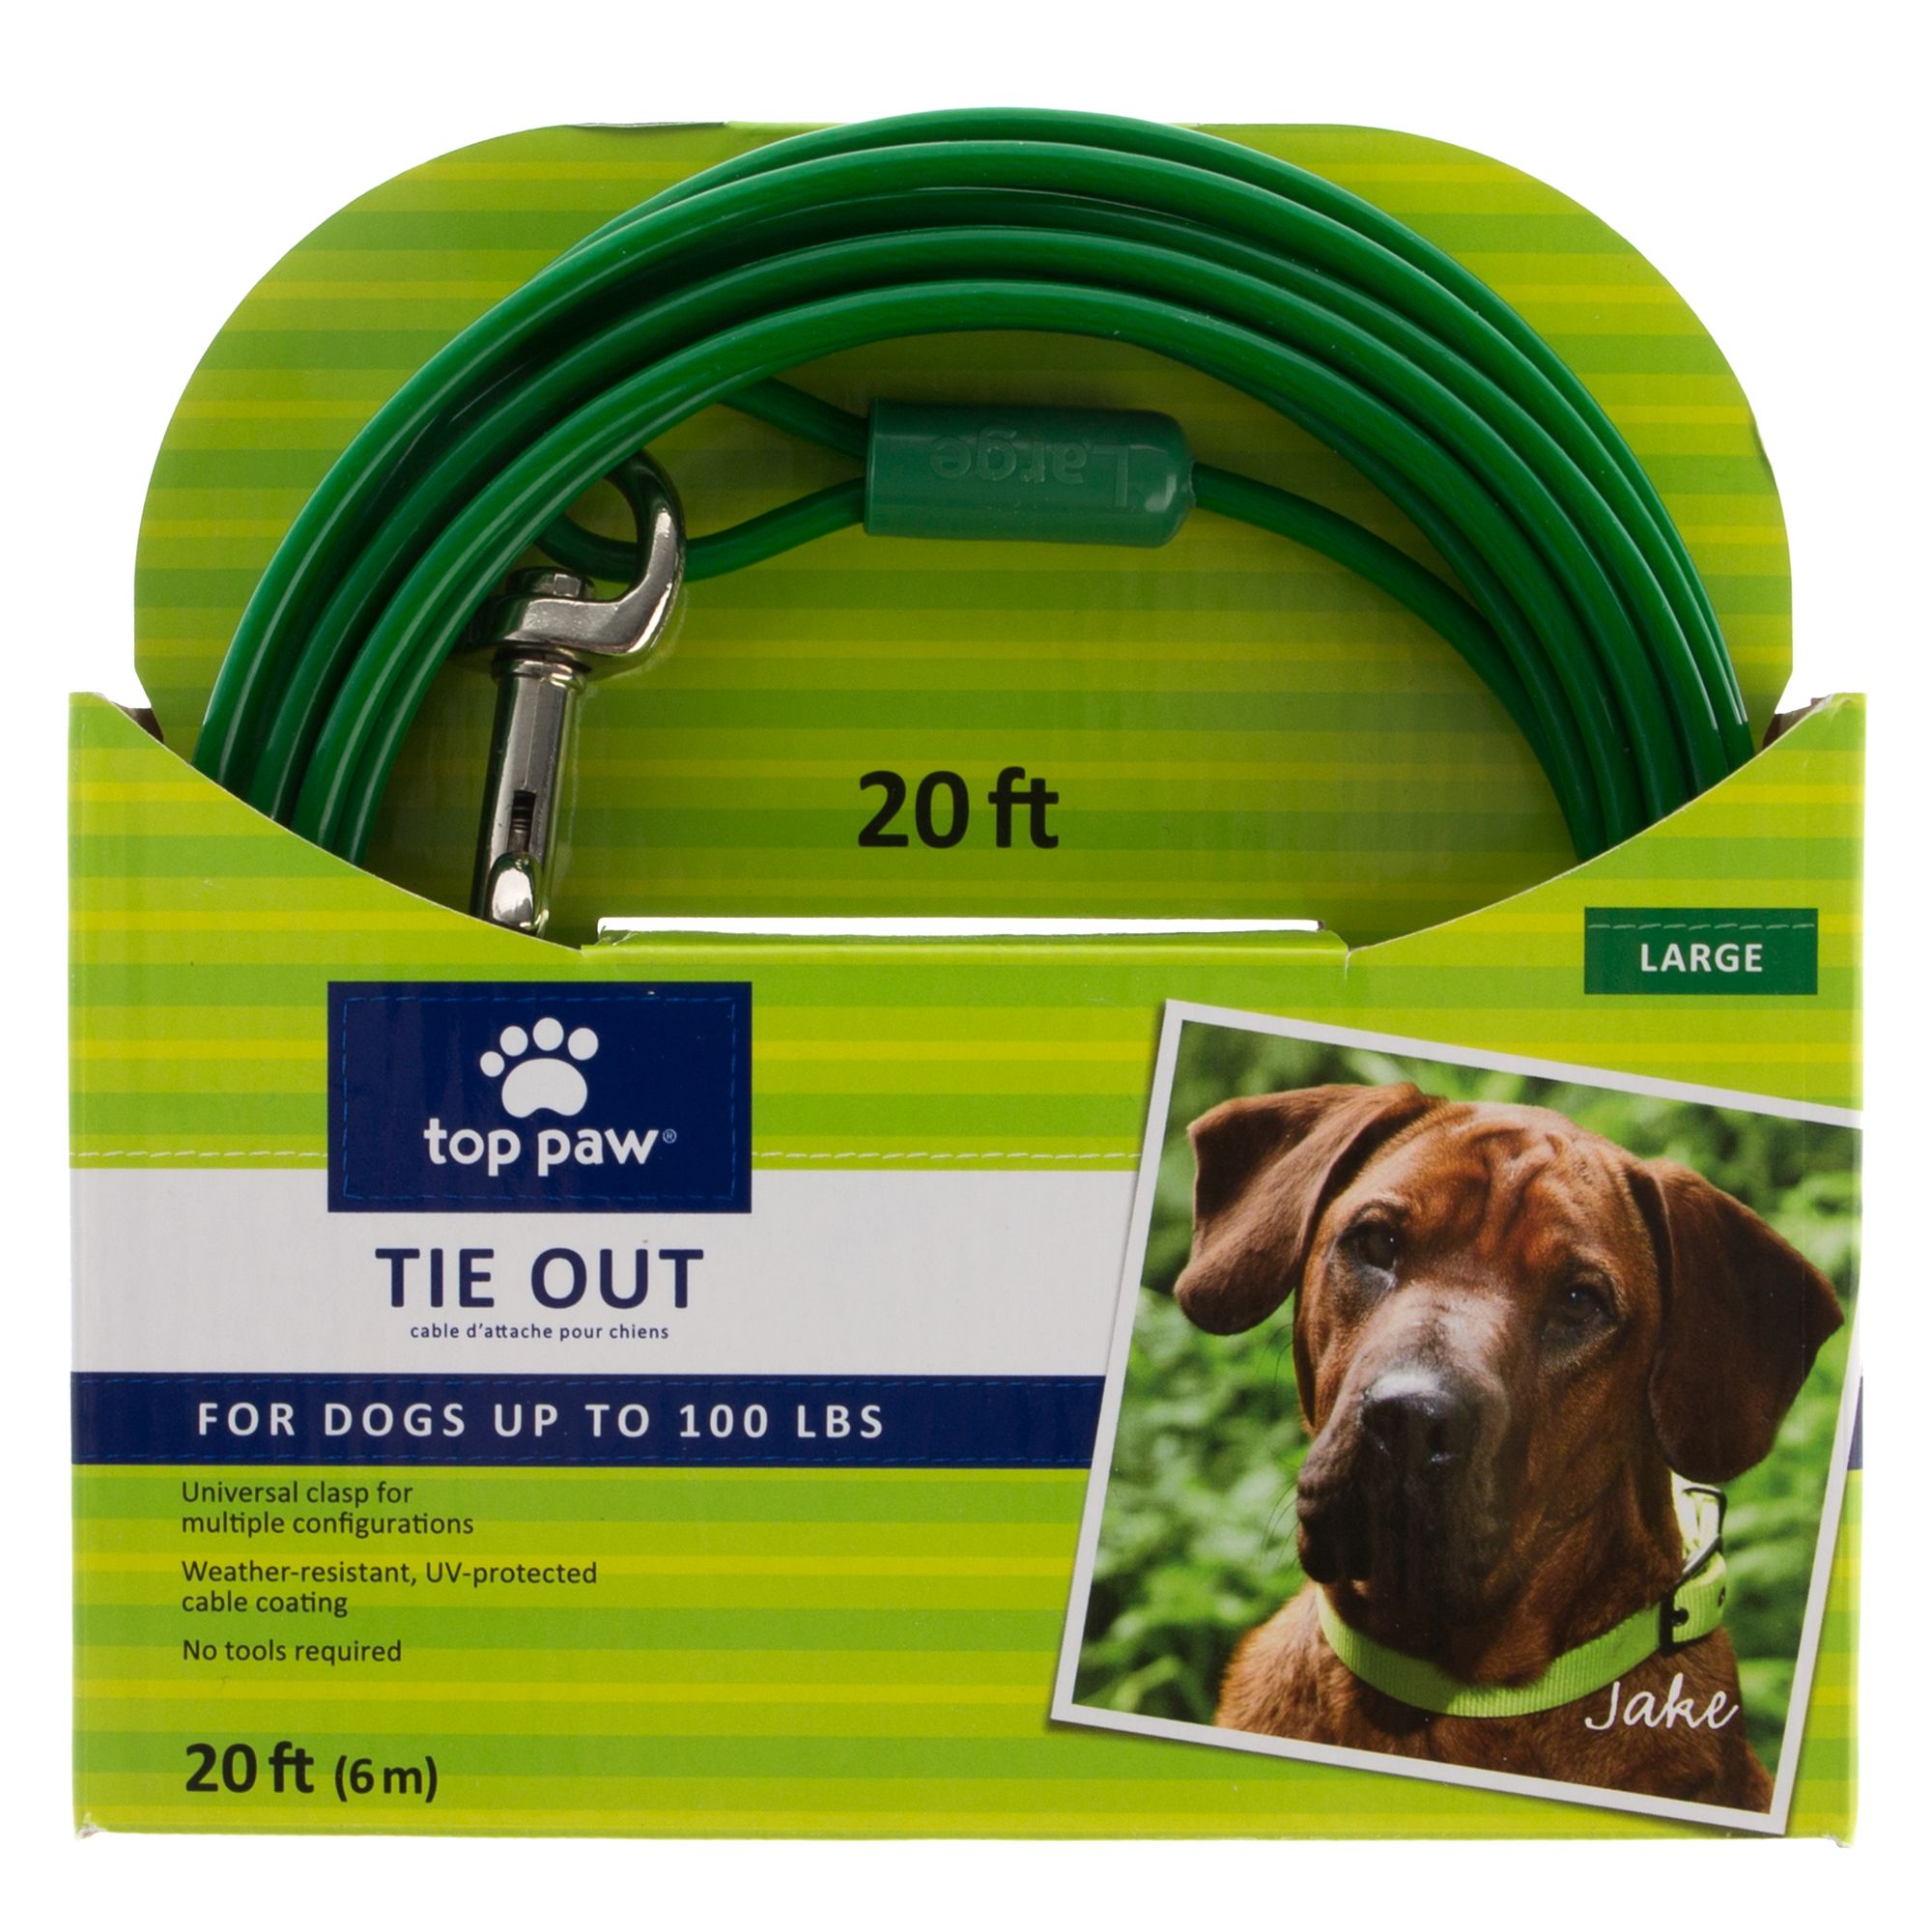 dog harness for tie out